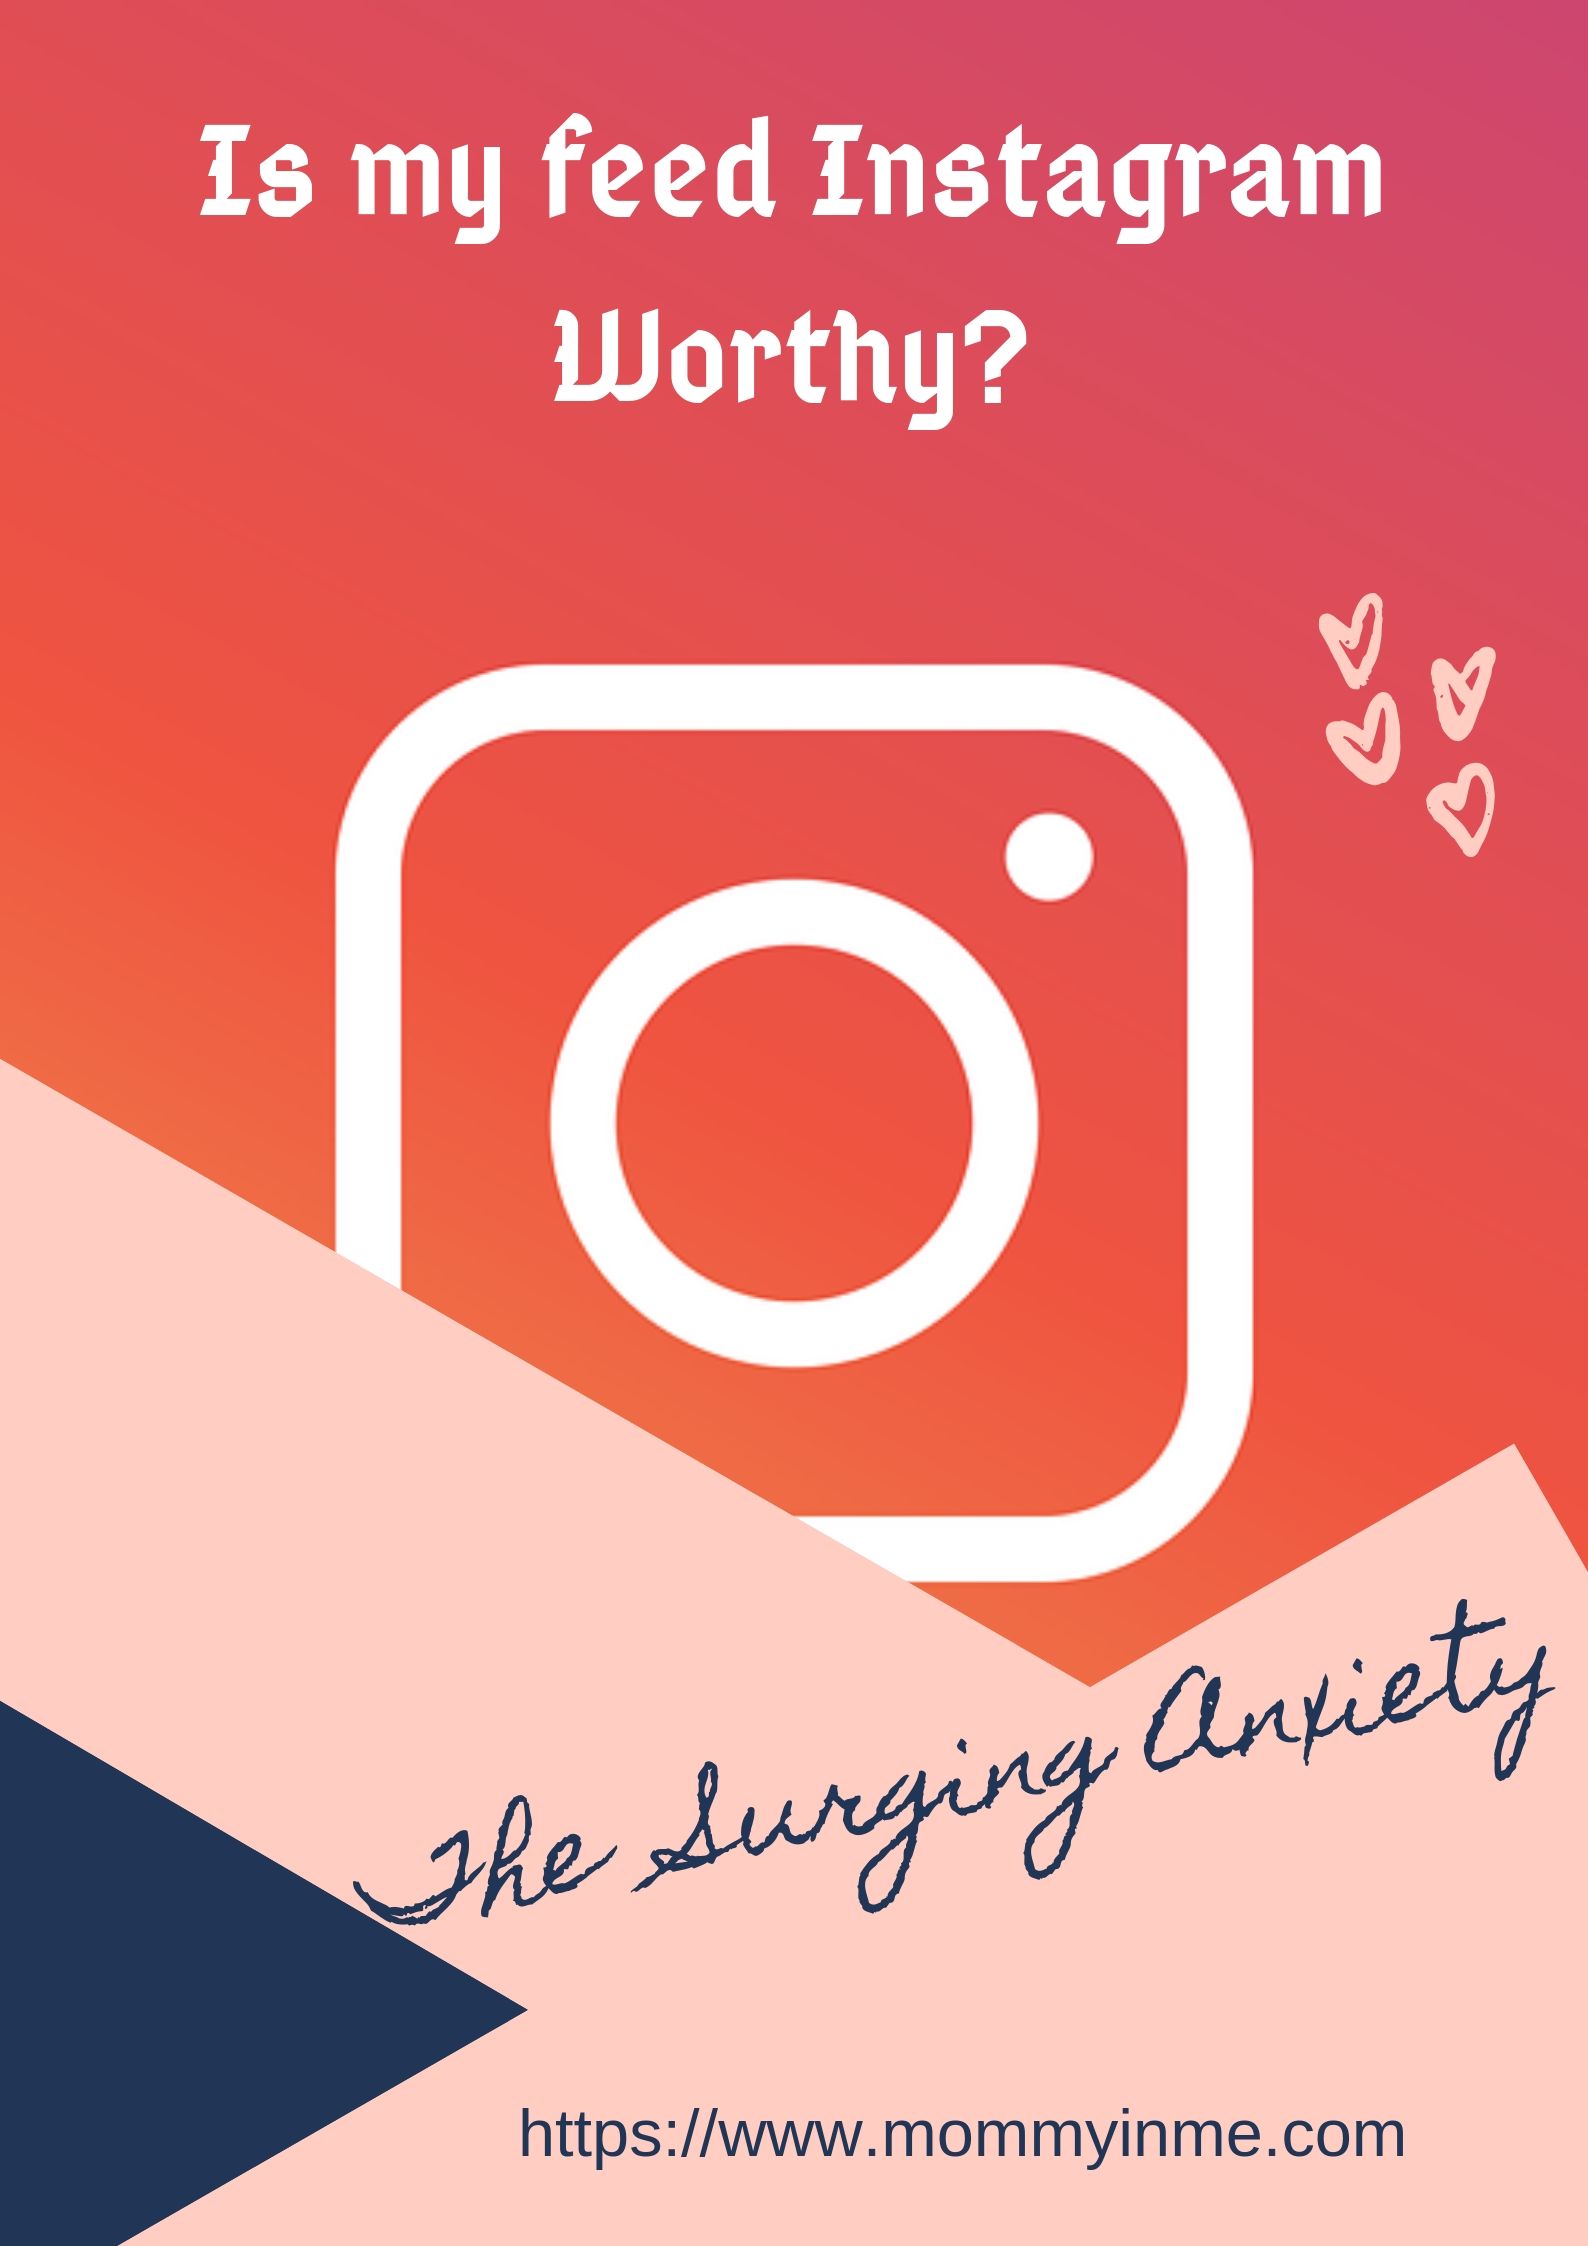 Is Instagram driving you crazy and dragging you into comparisons, changing your lifestyle and also making you jealous? Then you need to limit those feelings #instagram #anxiety #instagramanxiety #depression #lifestyle #mommyblogger #socialmedia #happiness 